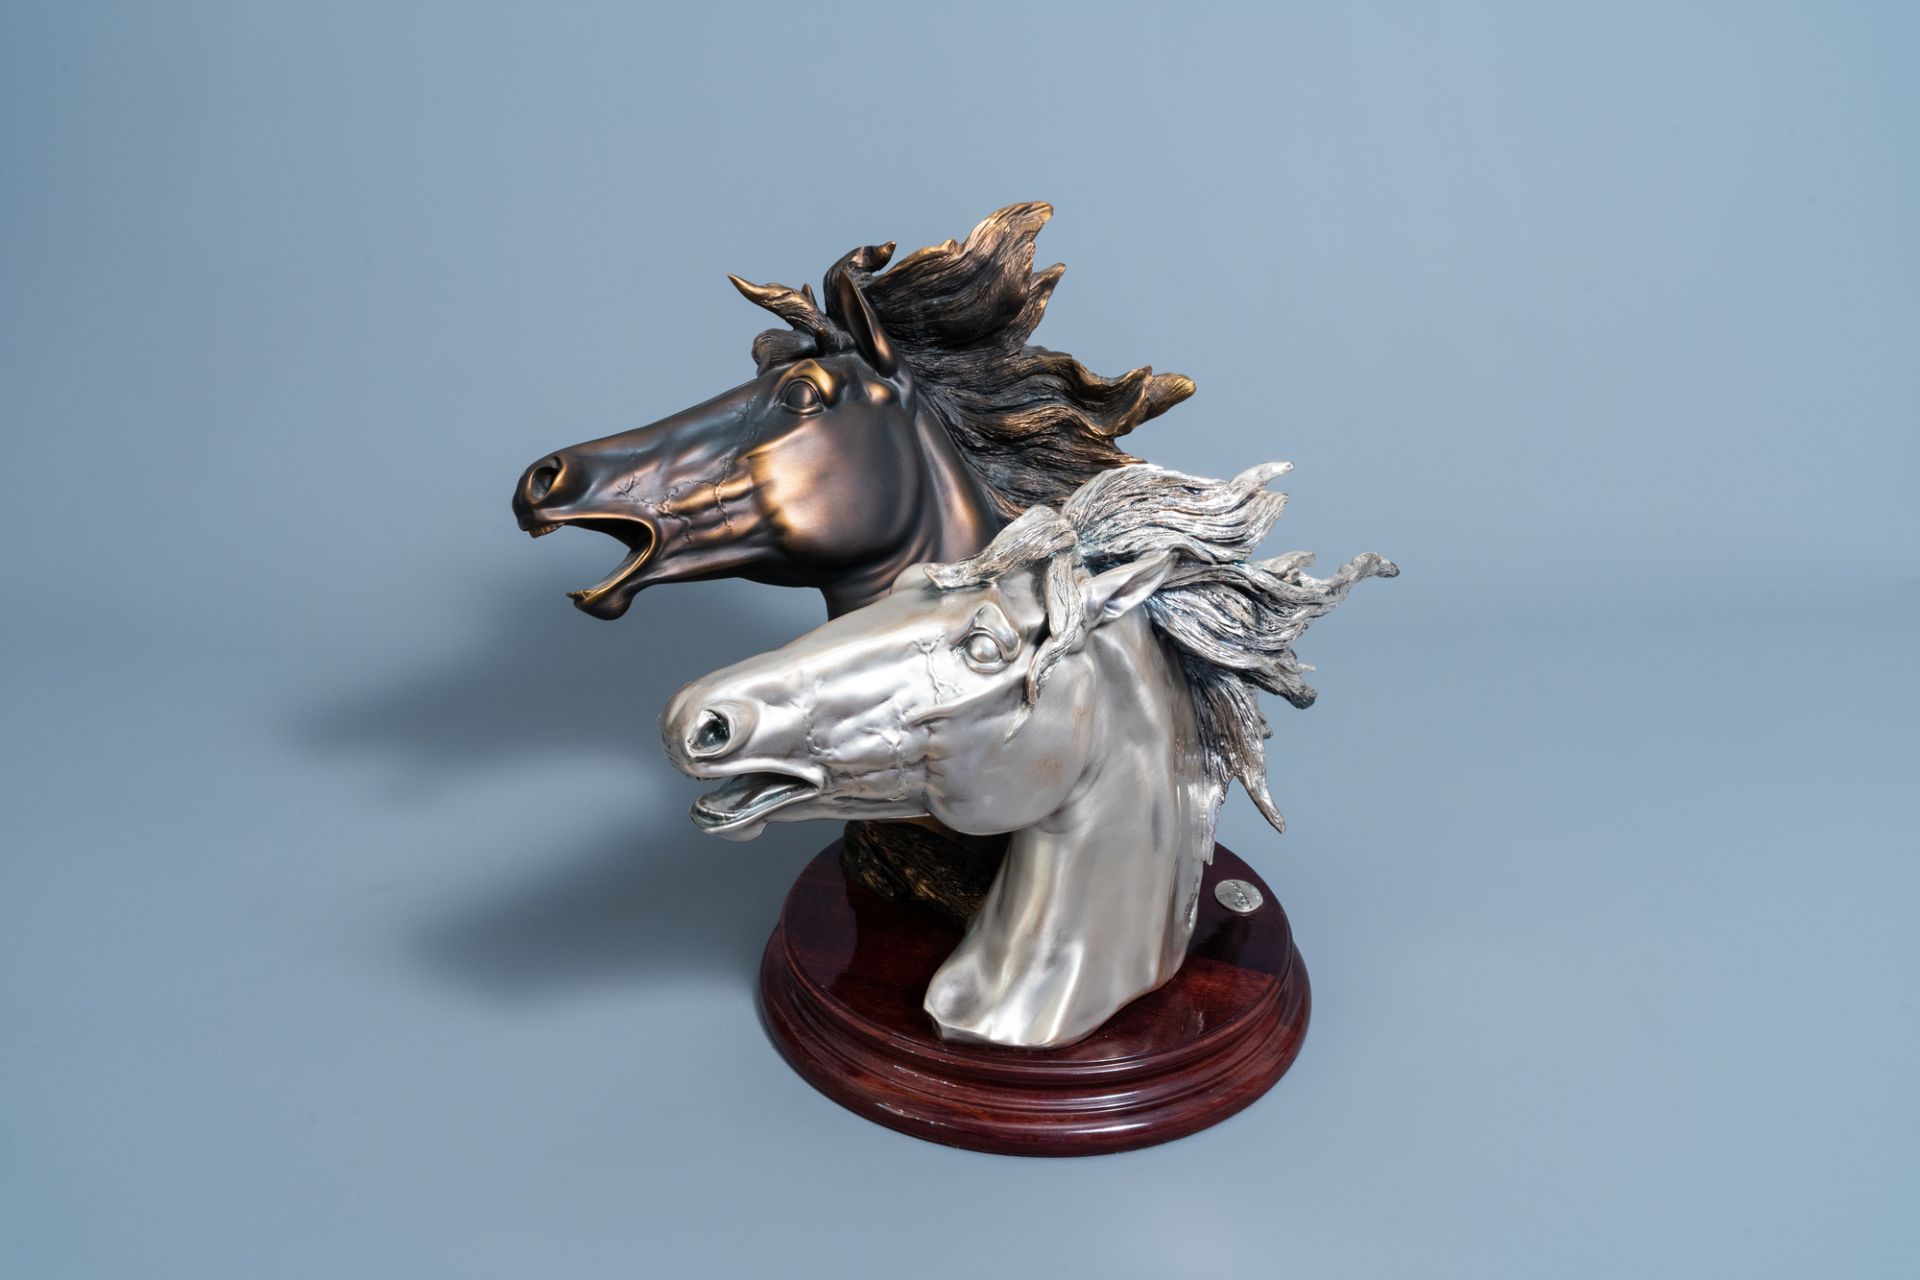 Illegibly signed: A silver plated and a patinated horse's head, Brunel, Italy, dated 1997